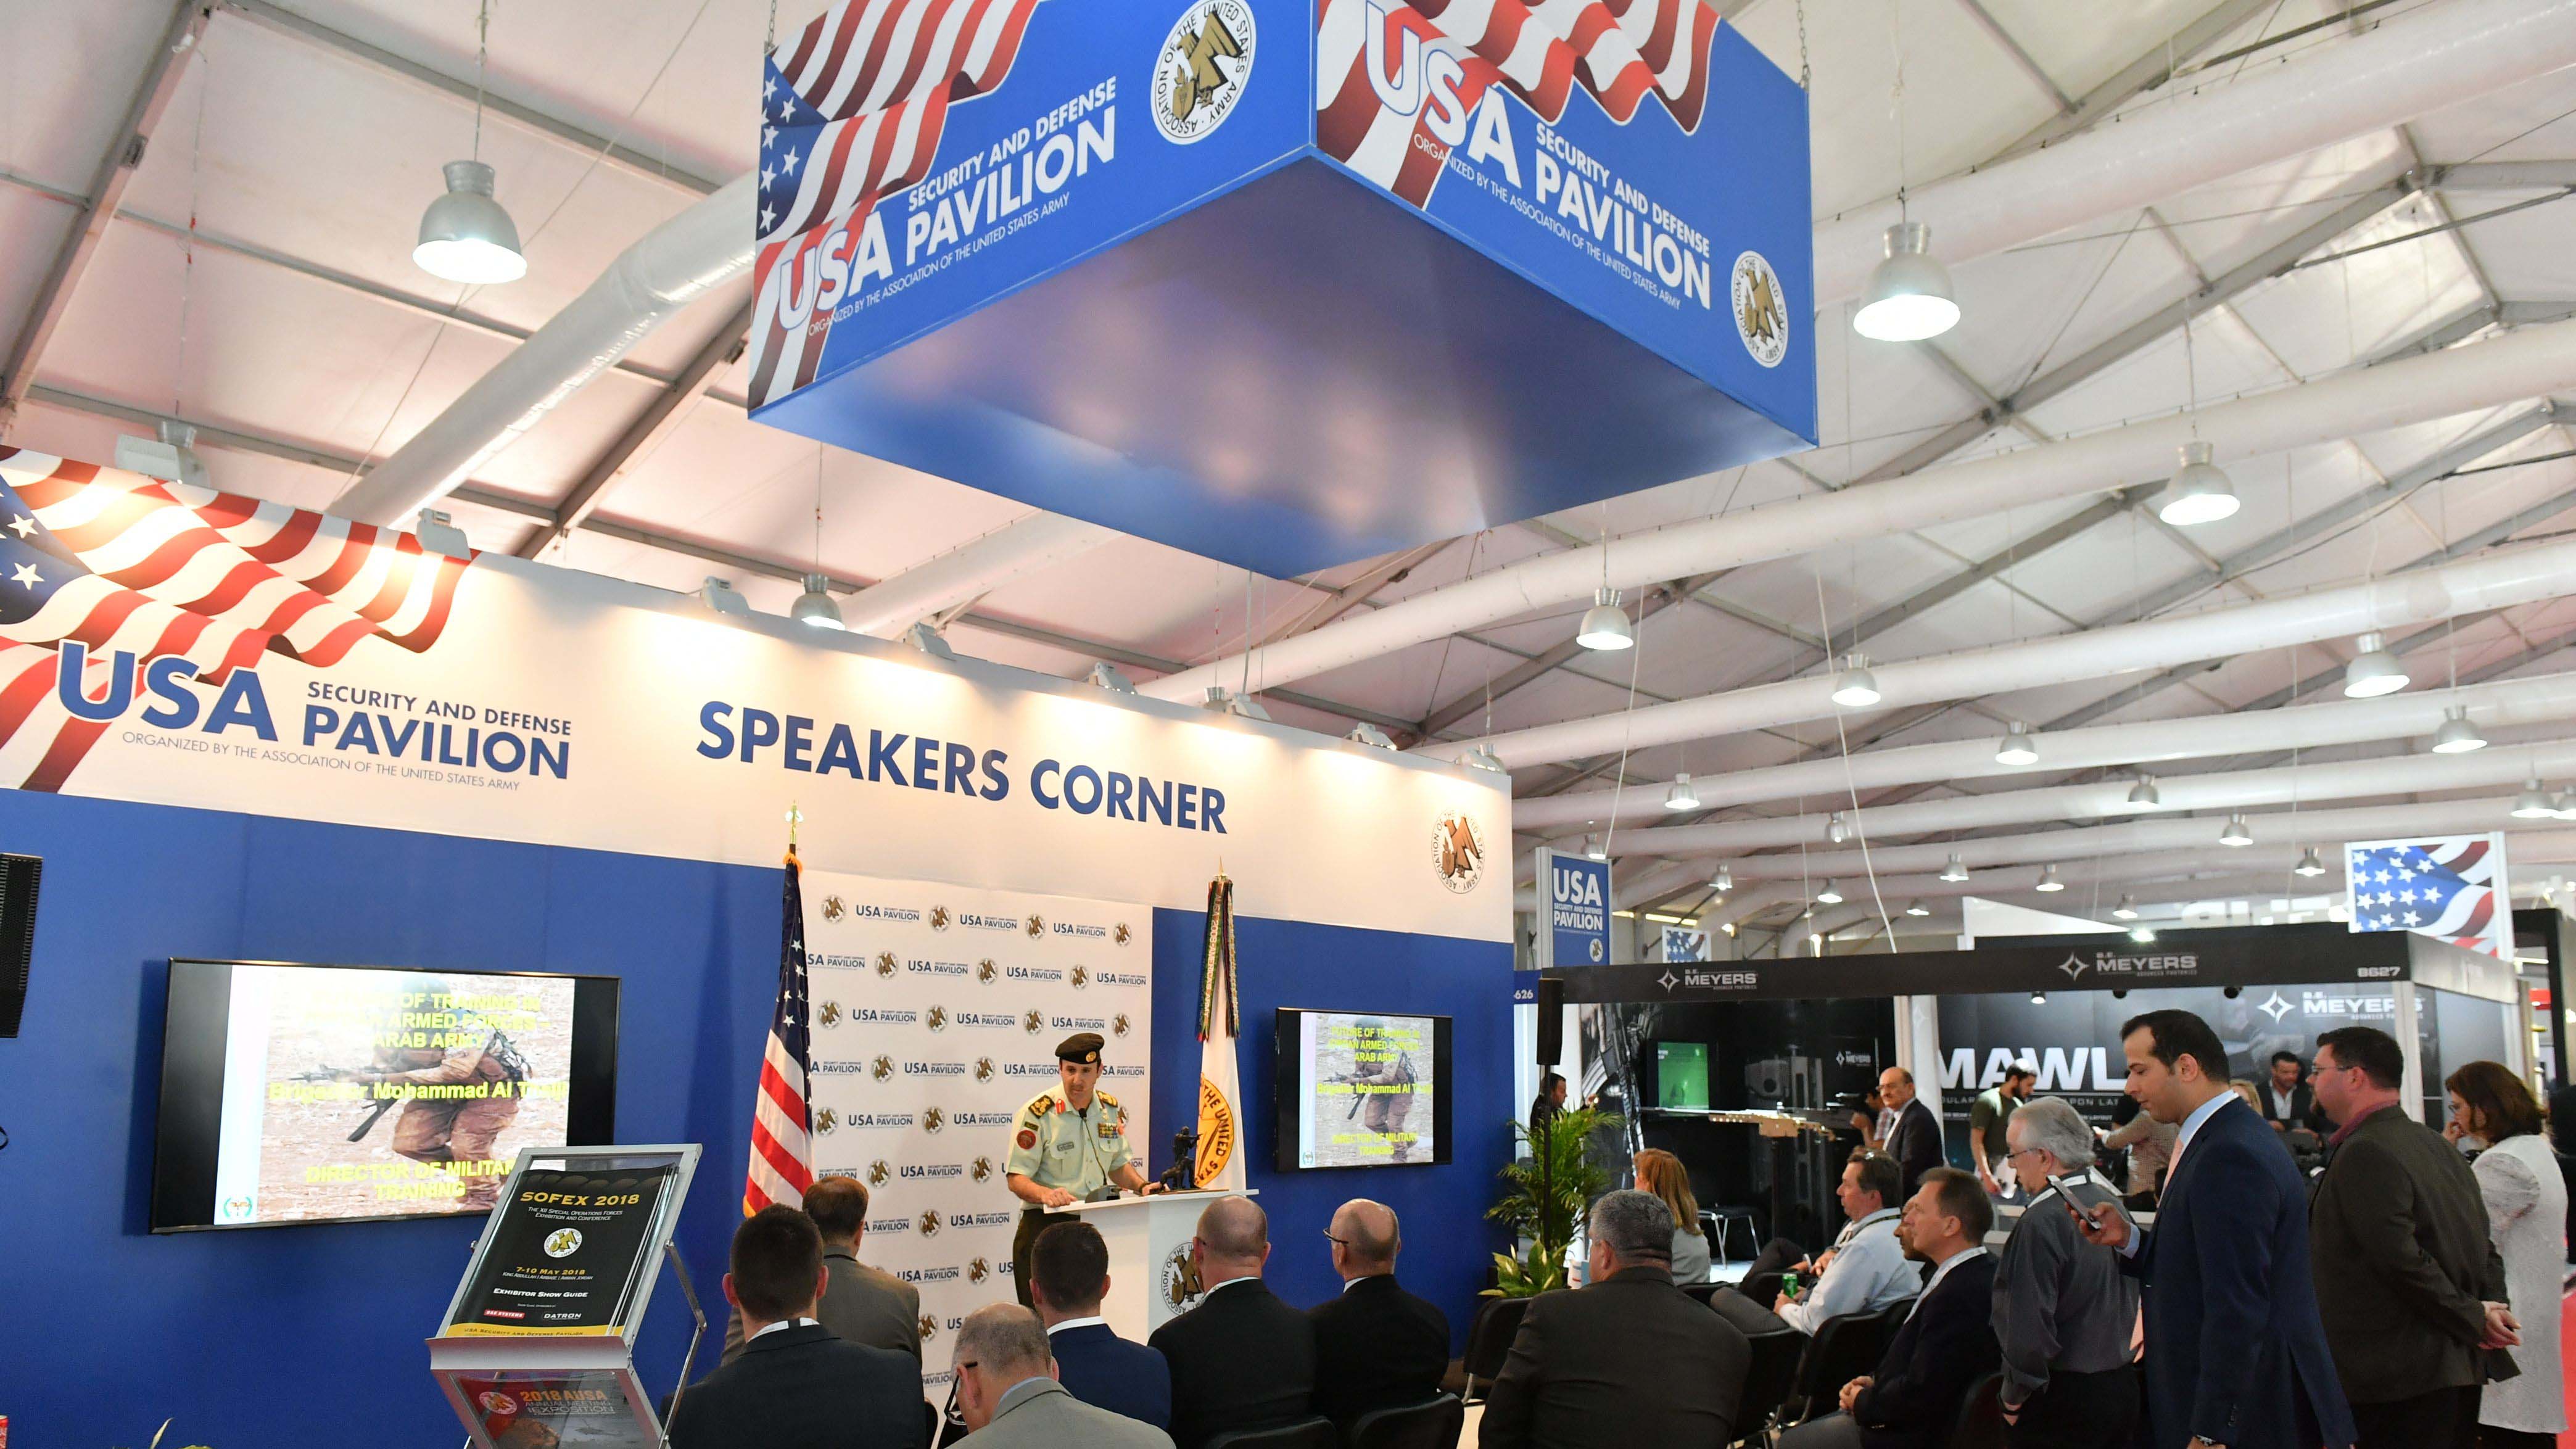 A view of the USA Pavilion at the 2018 SOFEX.